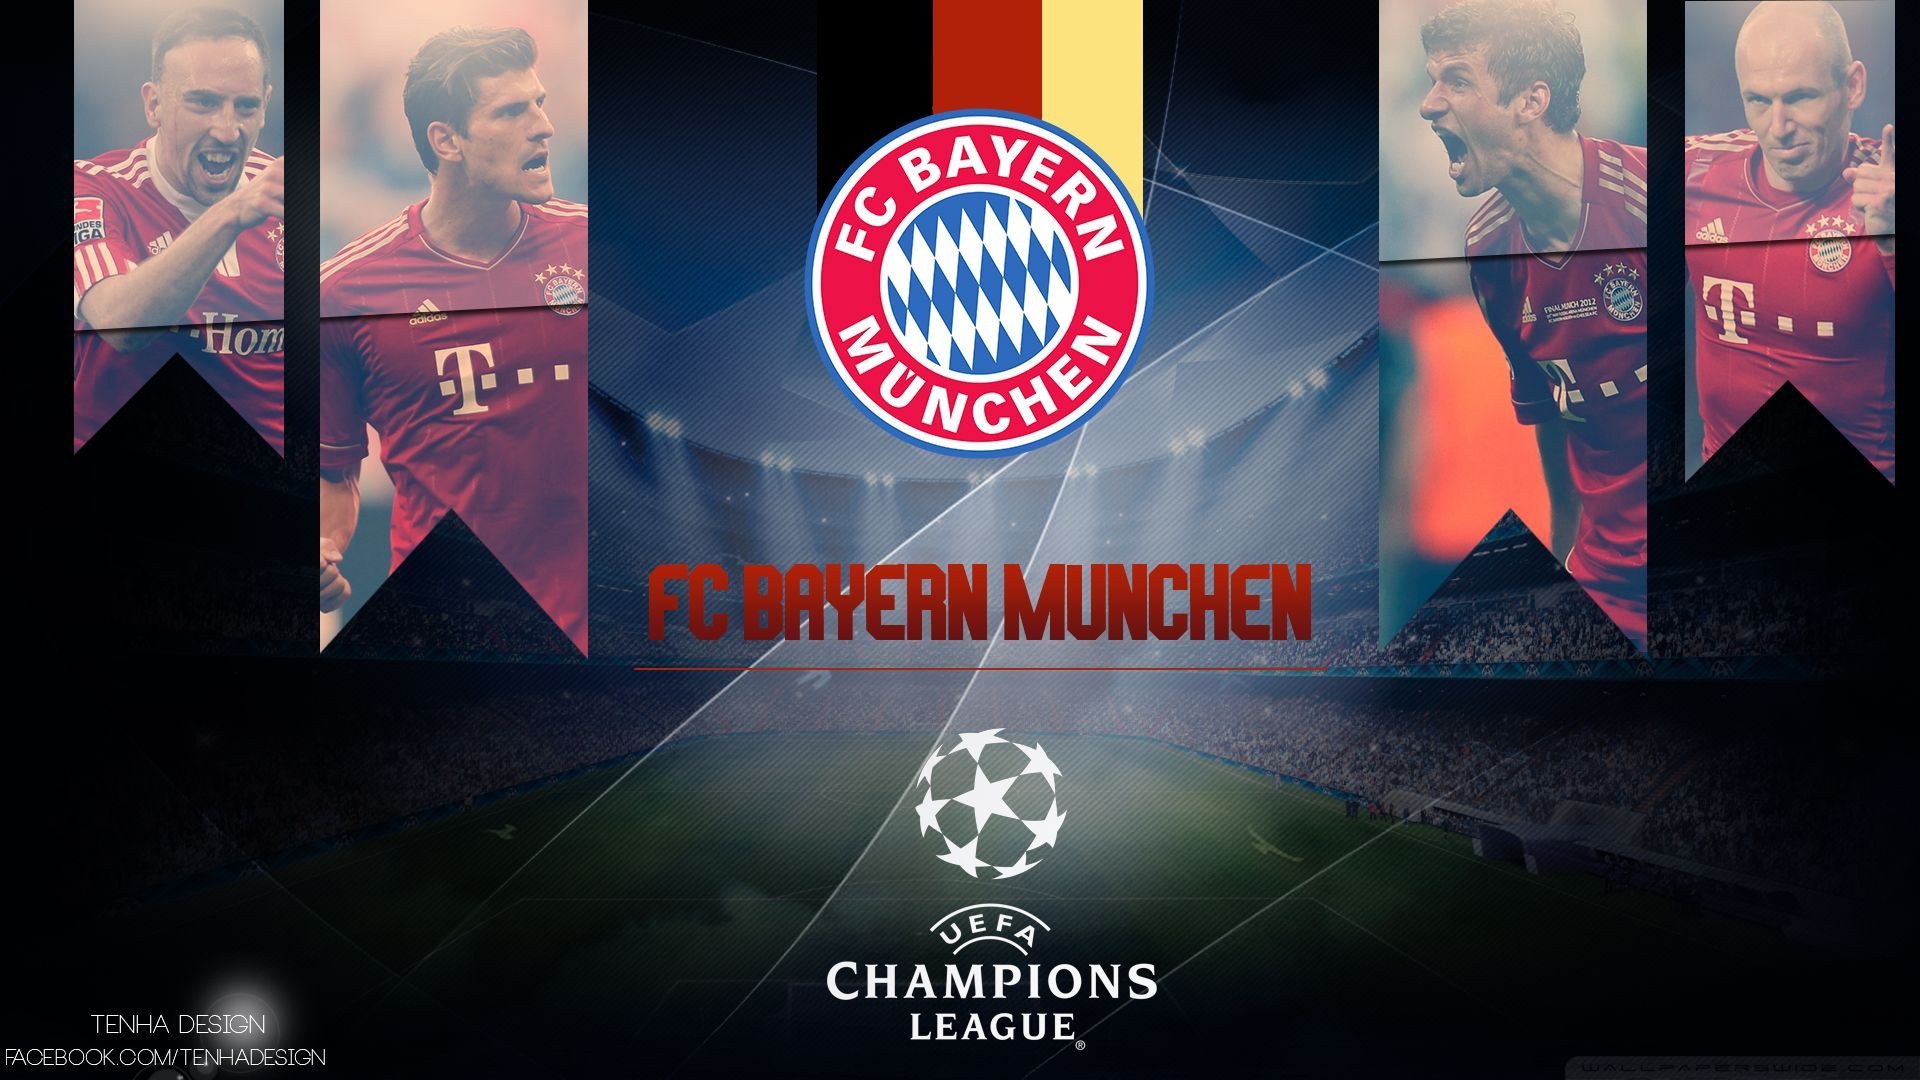 Bayern Munchen FC: FCB, One of the world's most successful football clubs. 1920x1080 Full HD Wallpaper.